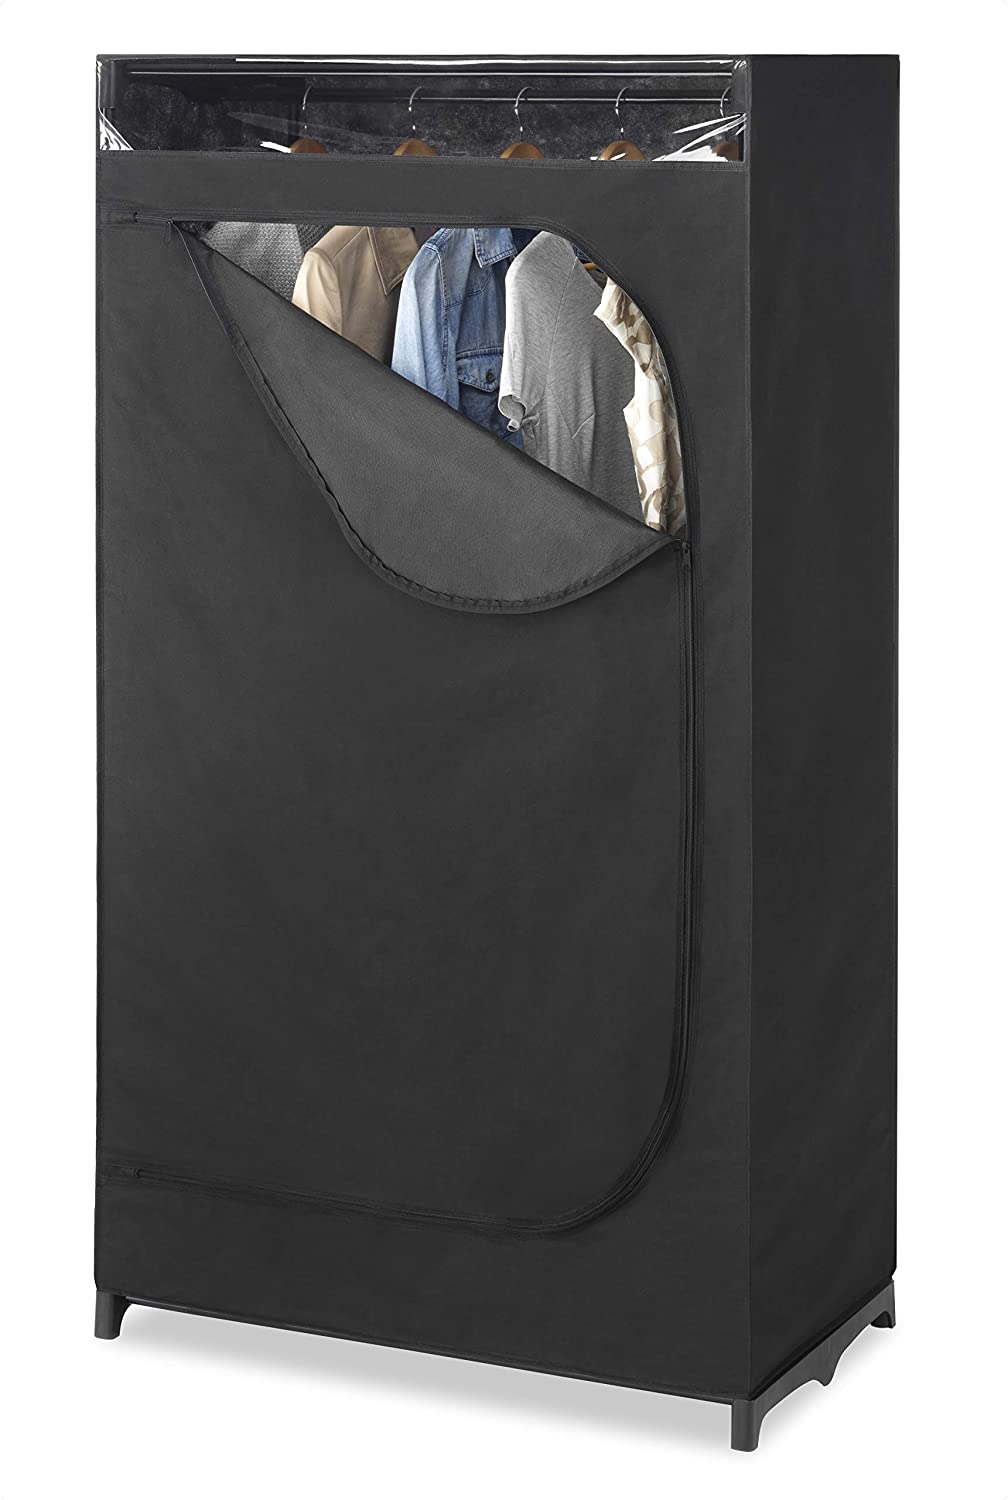 Photo 1 of USED
MISSING manual 
Whitmor Portable Wardrobe Clothes Closet Storage Organizer with Hanging Rack  Black Color  Notool Assembly  See Through Window  Washable Fabric Cover  Extra Strong  Durable  1975 x 36 x 64